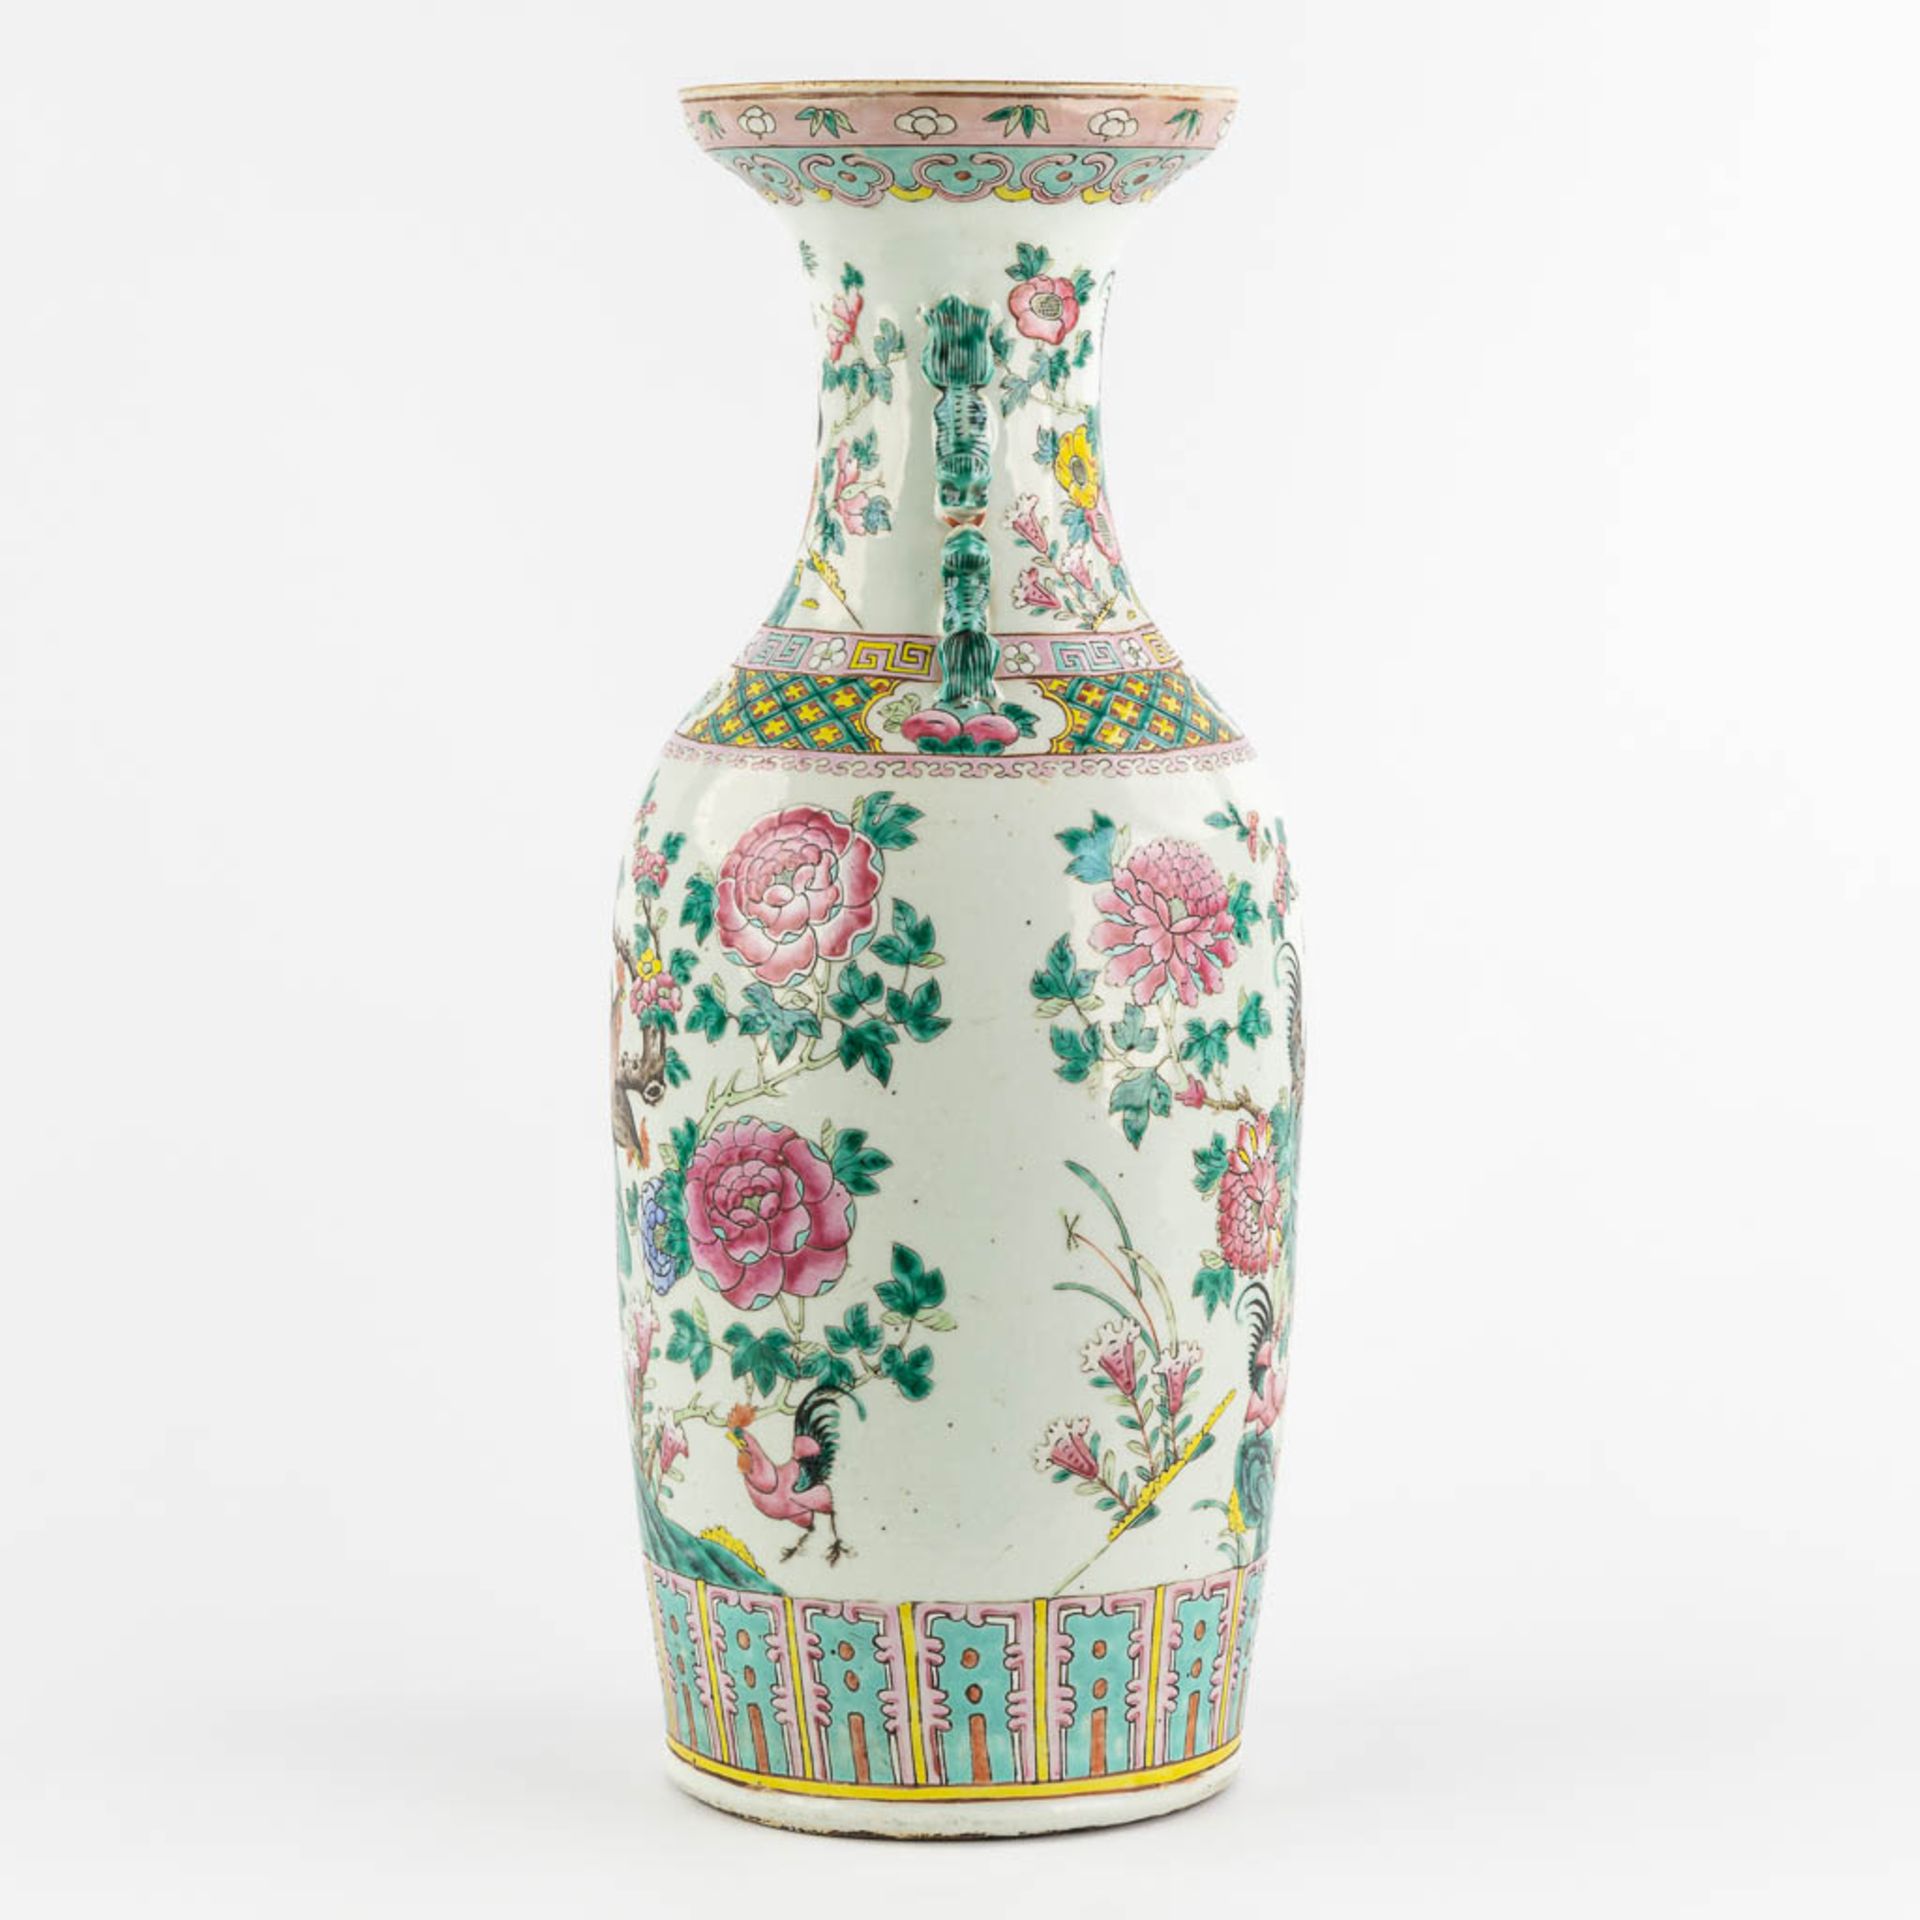 A large Chinese Famille Rose vase decorated with Chicken and Flora. (H:59 x D:23 cm) - Image 4 of 11